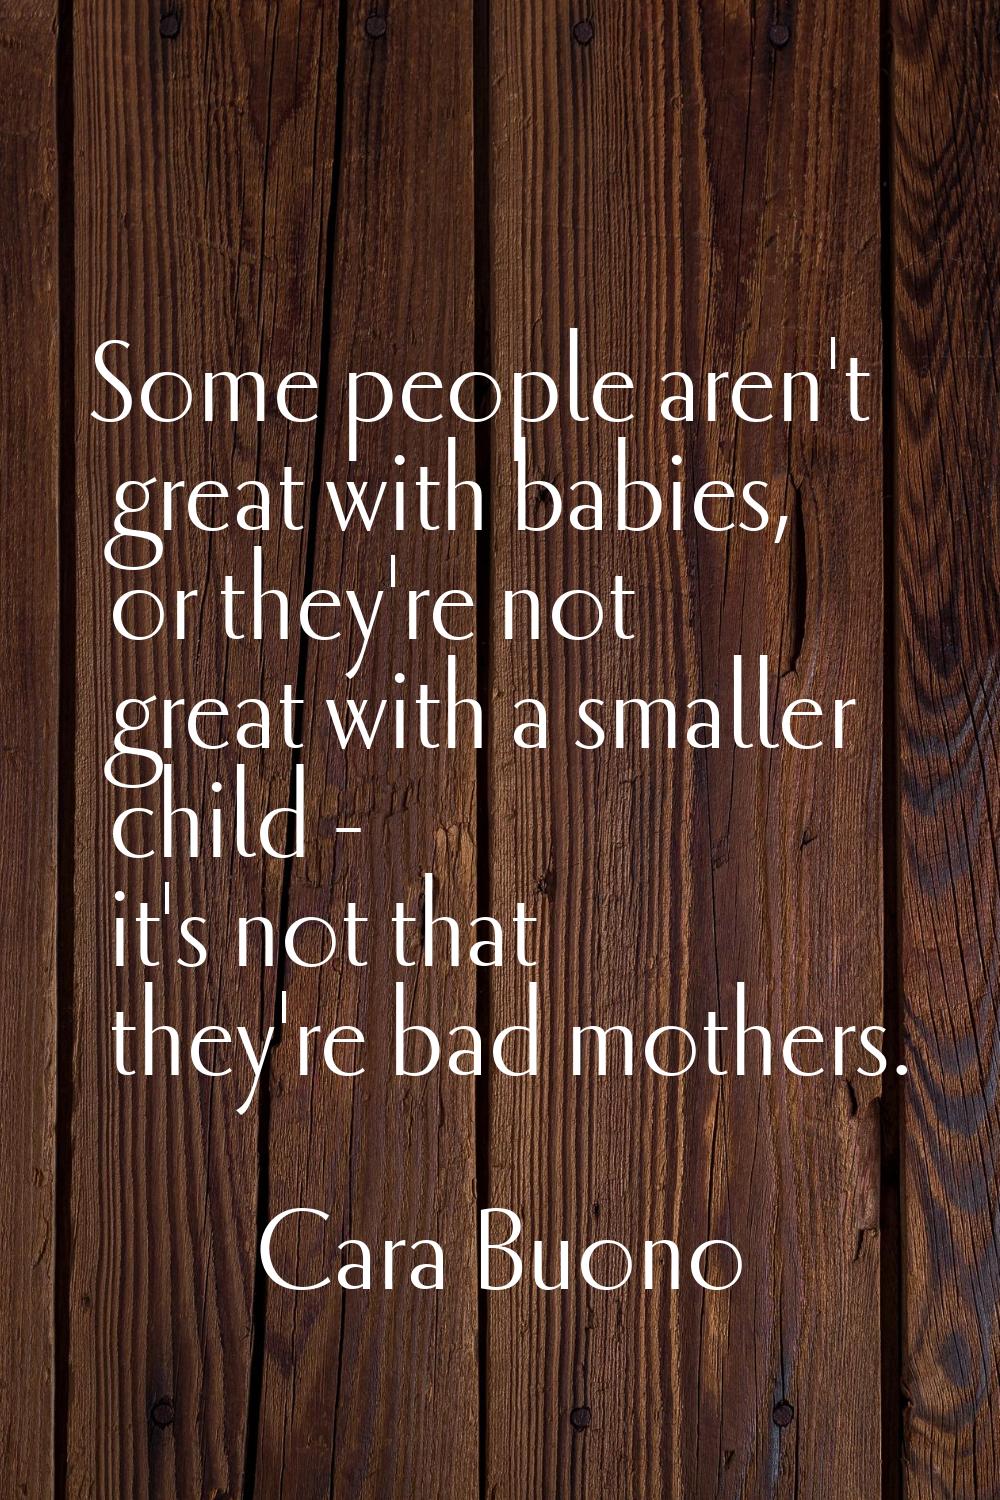 Some people aren't great with babies, or they're not great with a smaller child - it's not that the